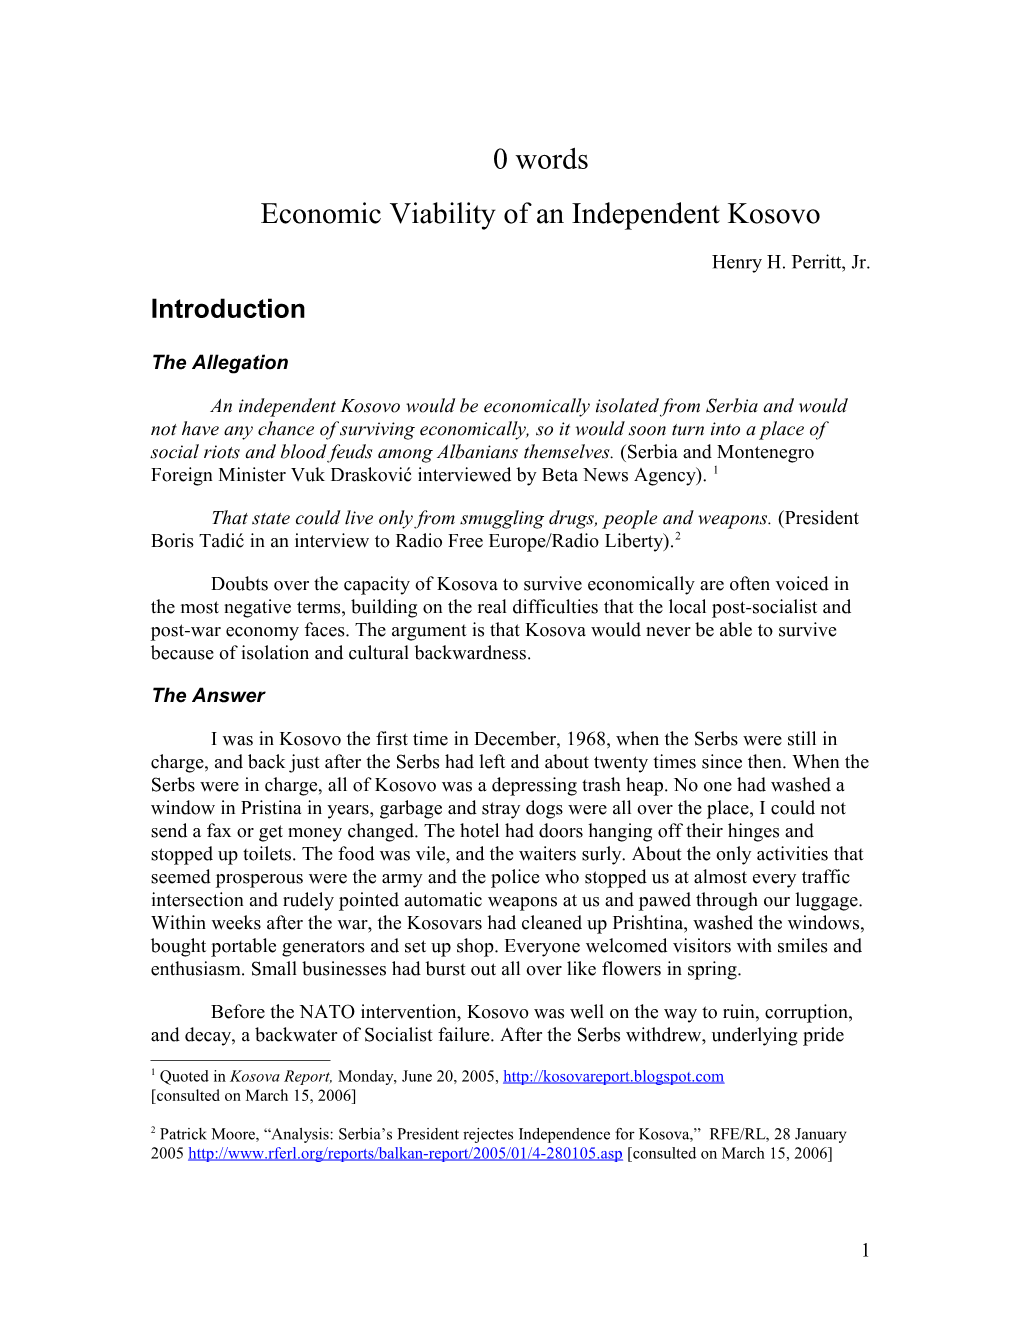 Economic Viability of an Independent Kosovo